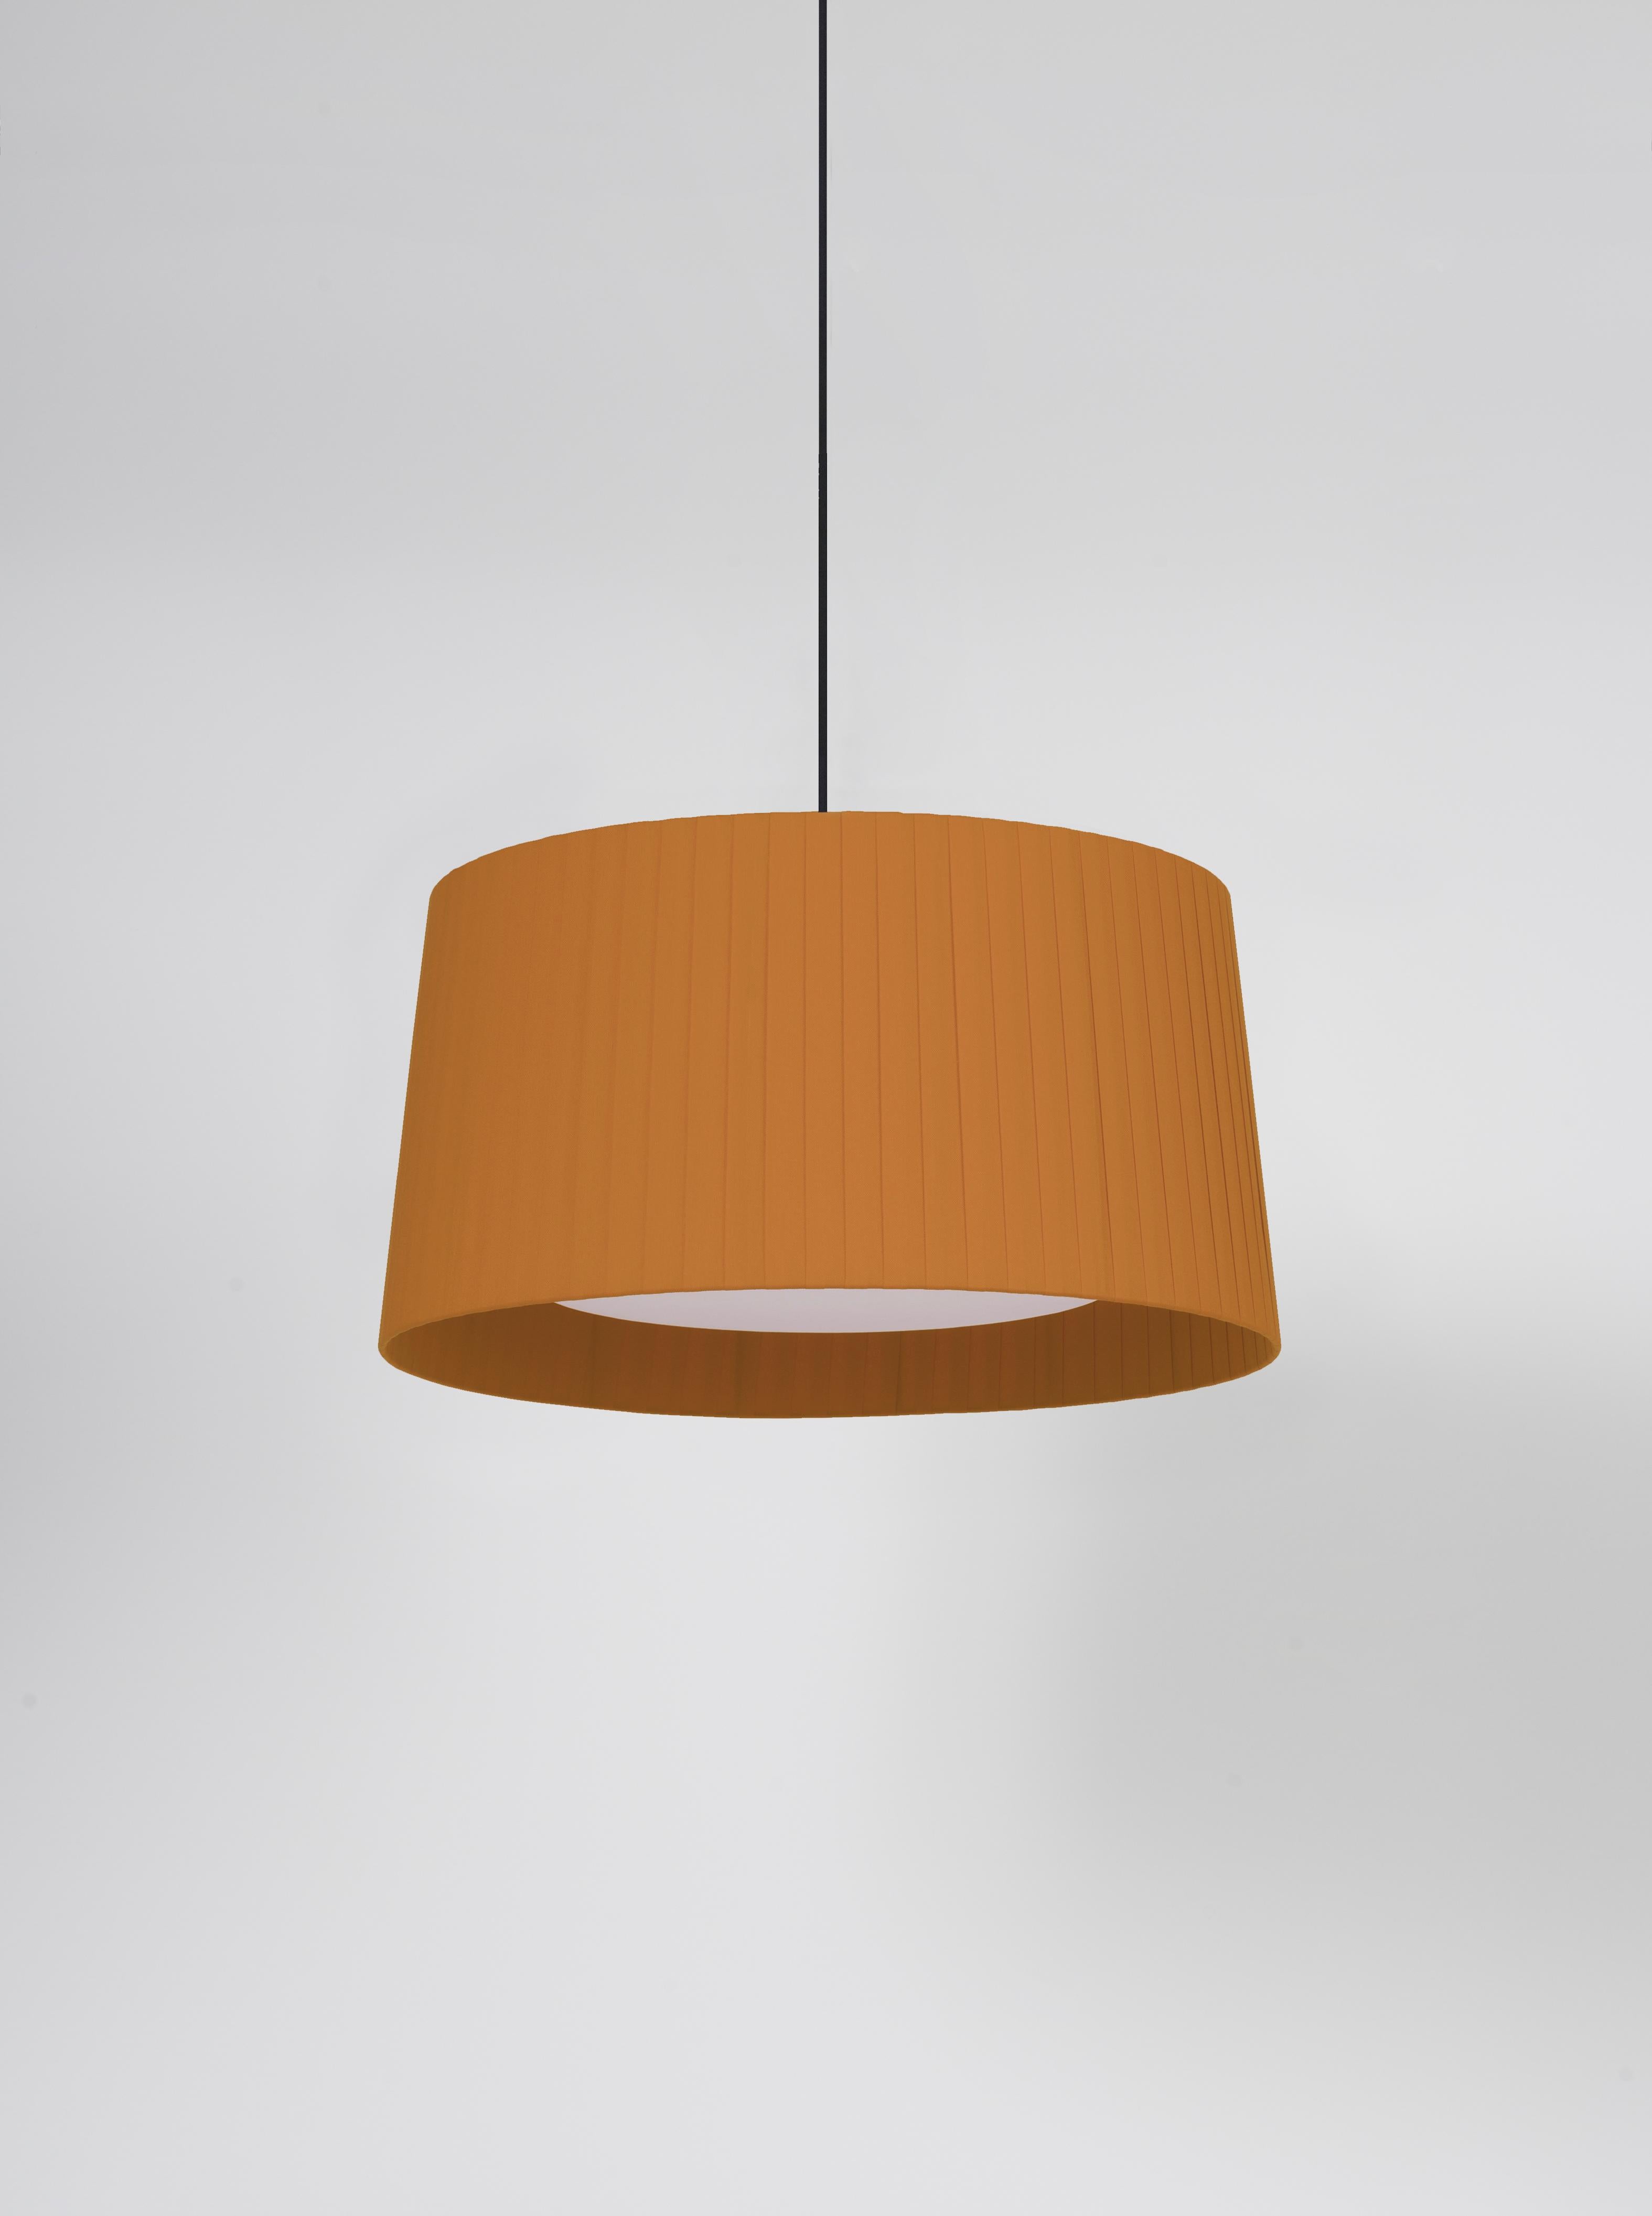 Mustard GT5 pendant lamp by Santa & Cole
Dimensions: D 62 x H 32 cm
Materials: Metal, ribbon.
Available in other colors. Available in 2 lights version.

Designed for intermediate volumes and household areas, GT5 and GT6 are hanging lamps with